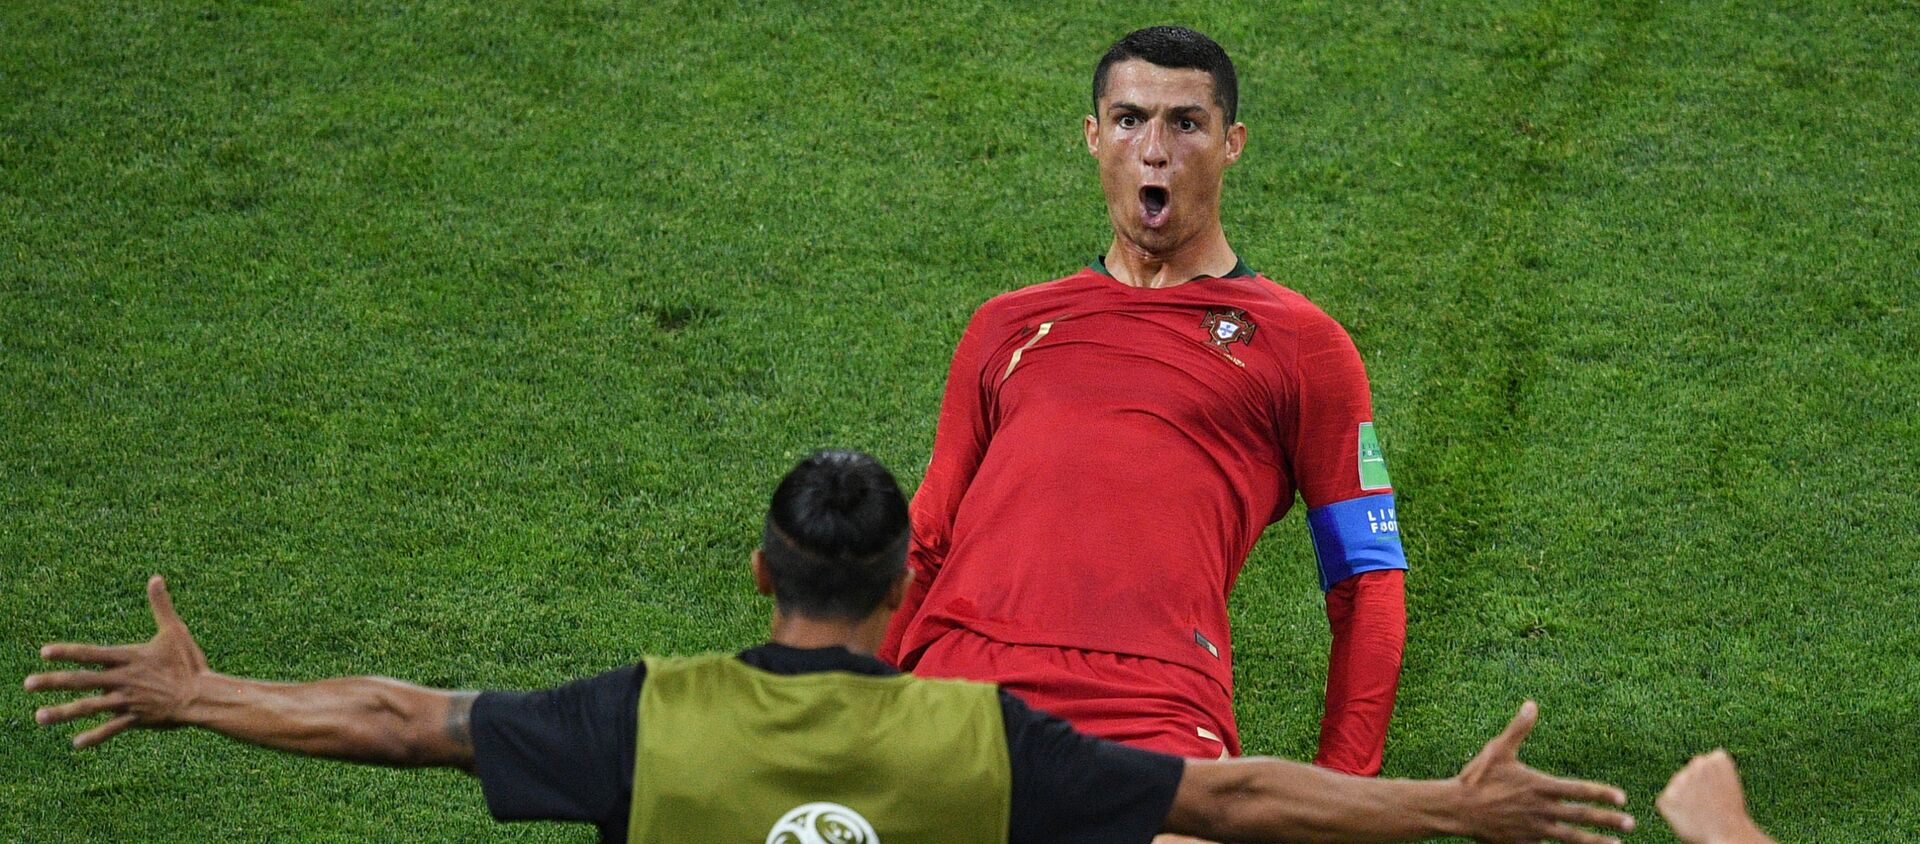 Portugal's Cristiano Ronaldo celebrates a goal during a World Cup Group B soccer match between Portugal and Spain at the Fisht stadium in Sochi, Russia, June 15, 2018. - Sputnik International, 1920, 05.06.2021